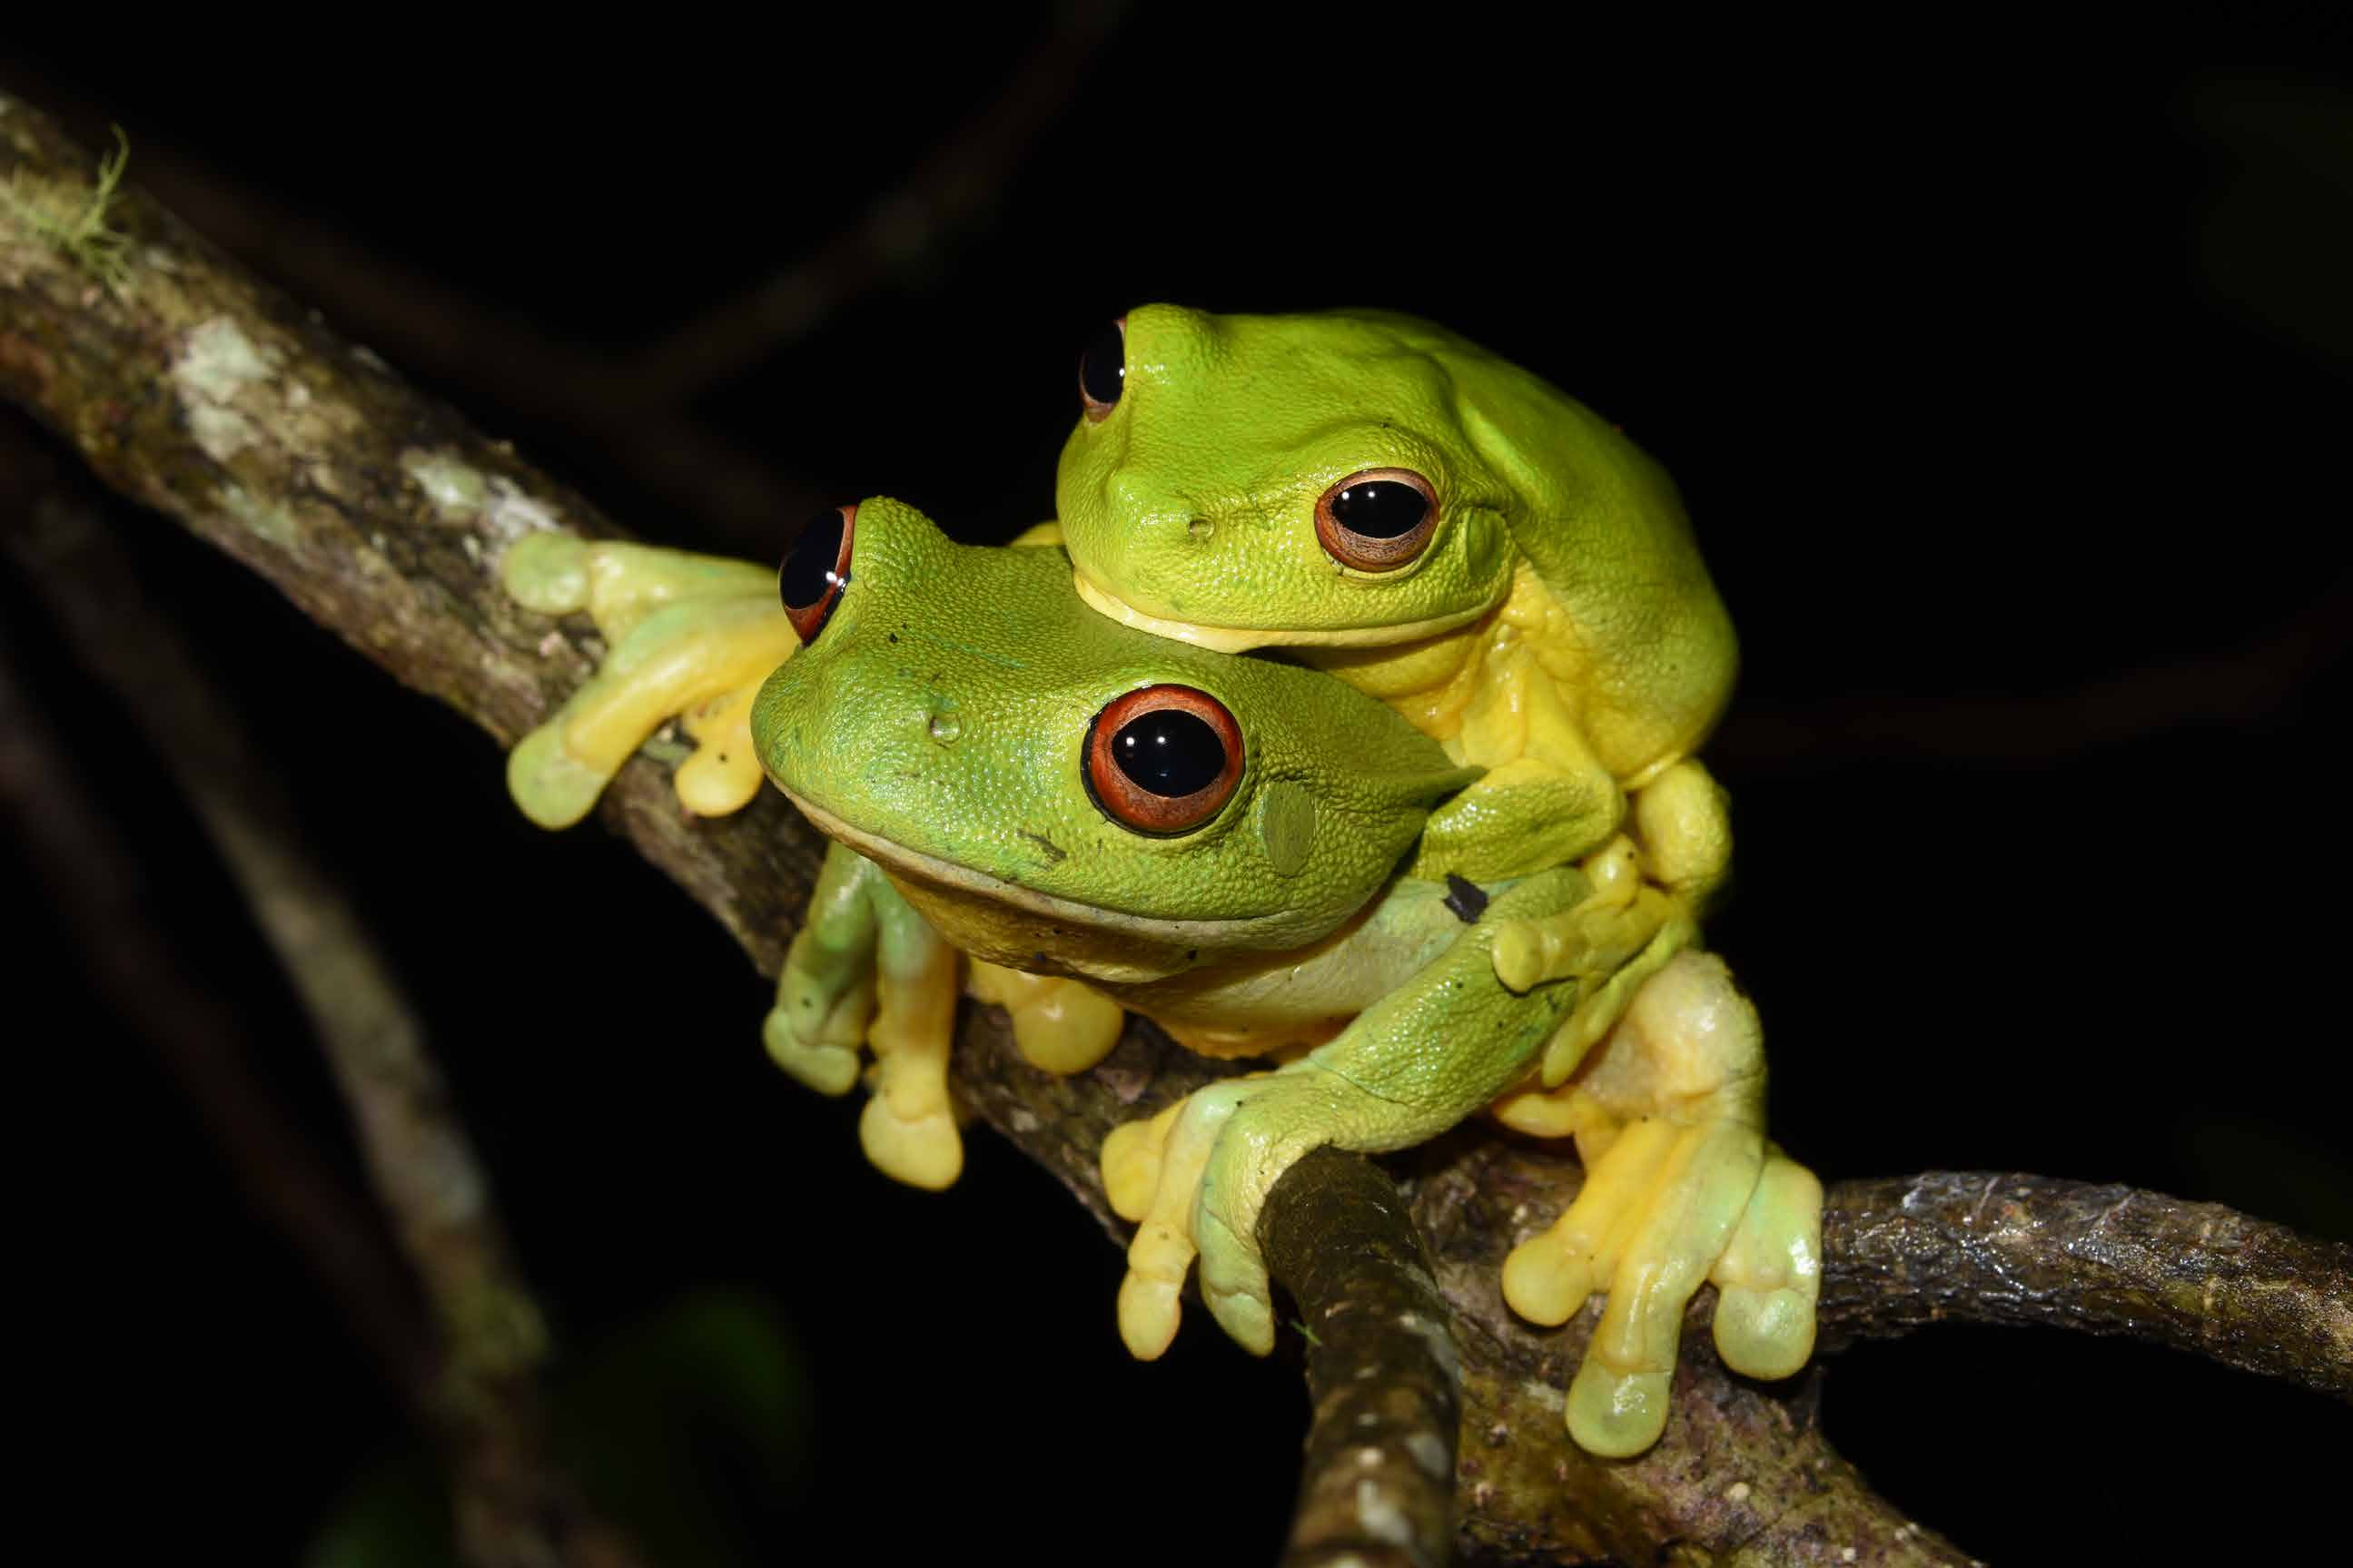 Frog monitoring - two frogs on a branch